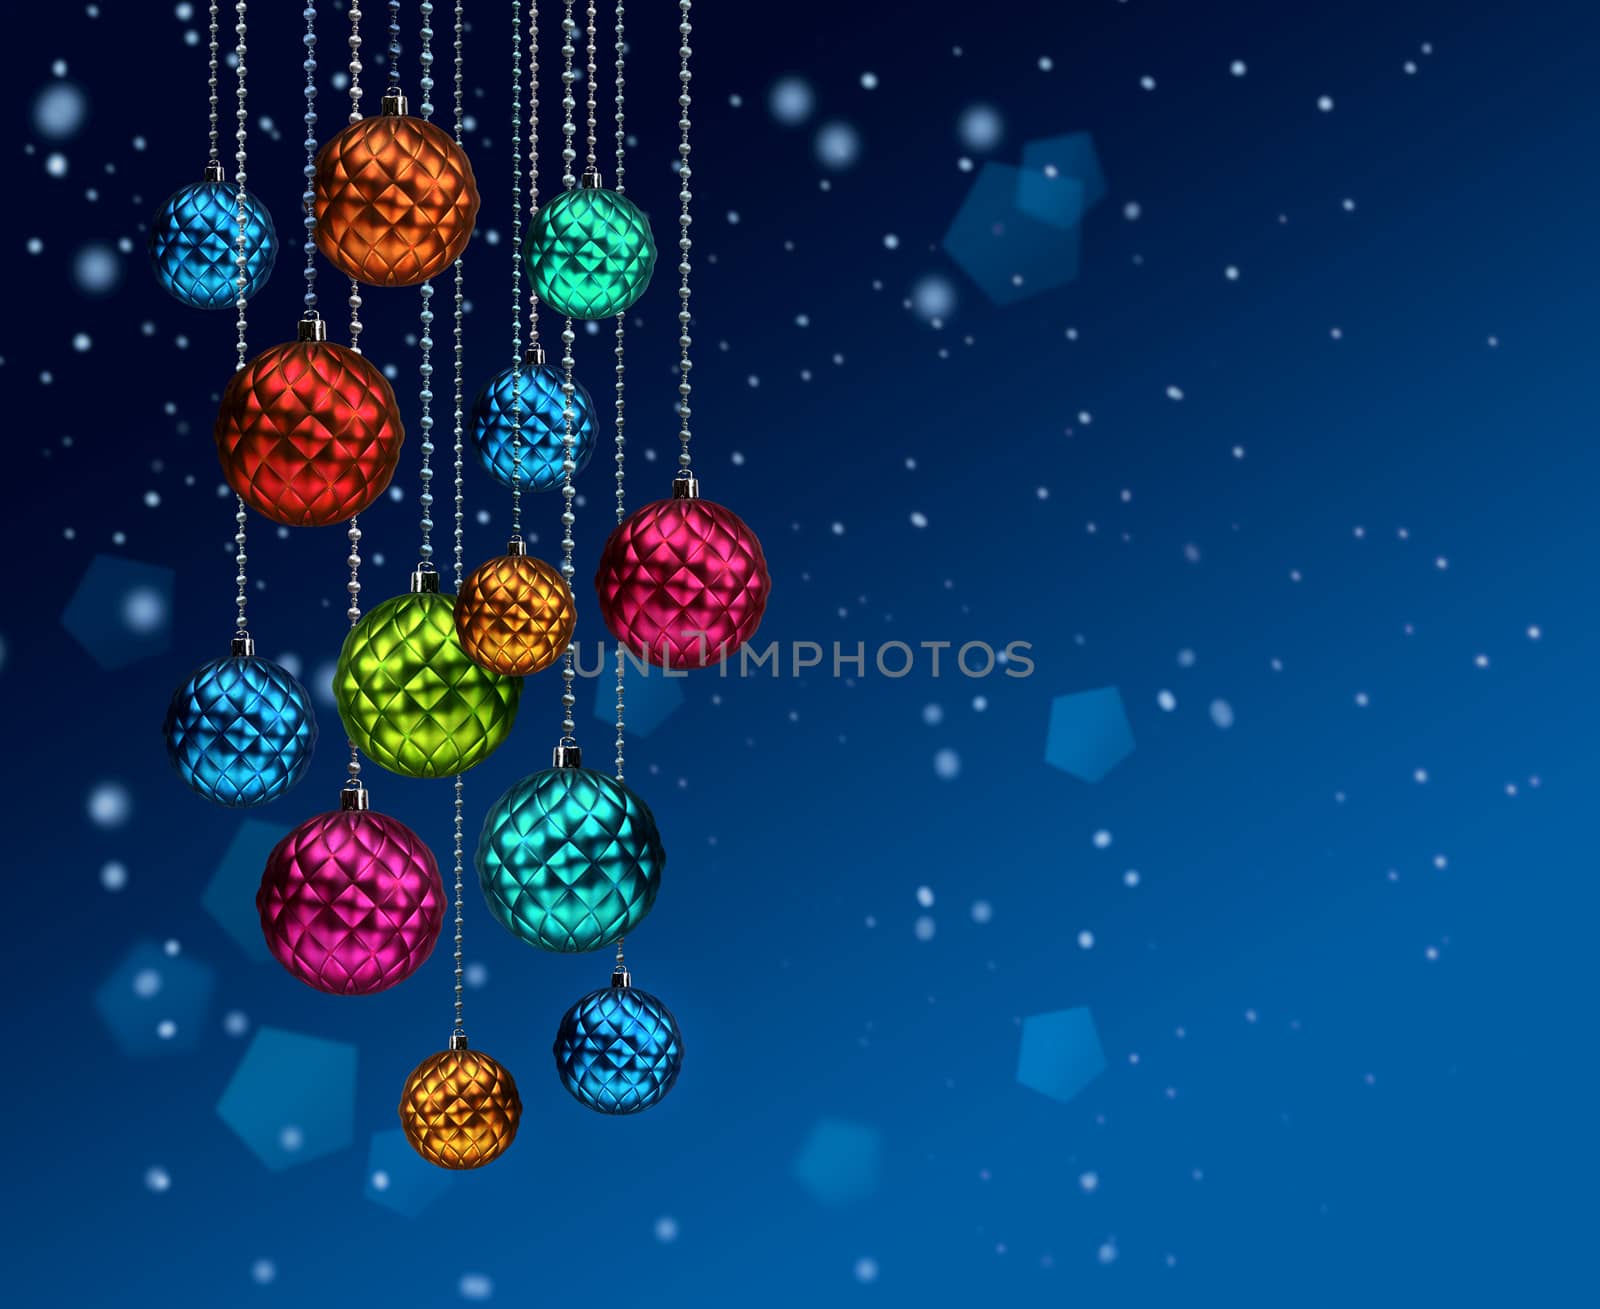 Group of colorful Christmas glass decoration balls on blue snowfall background